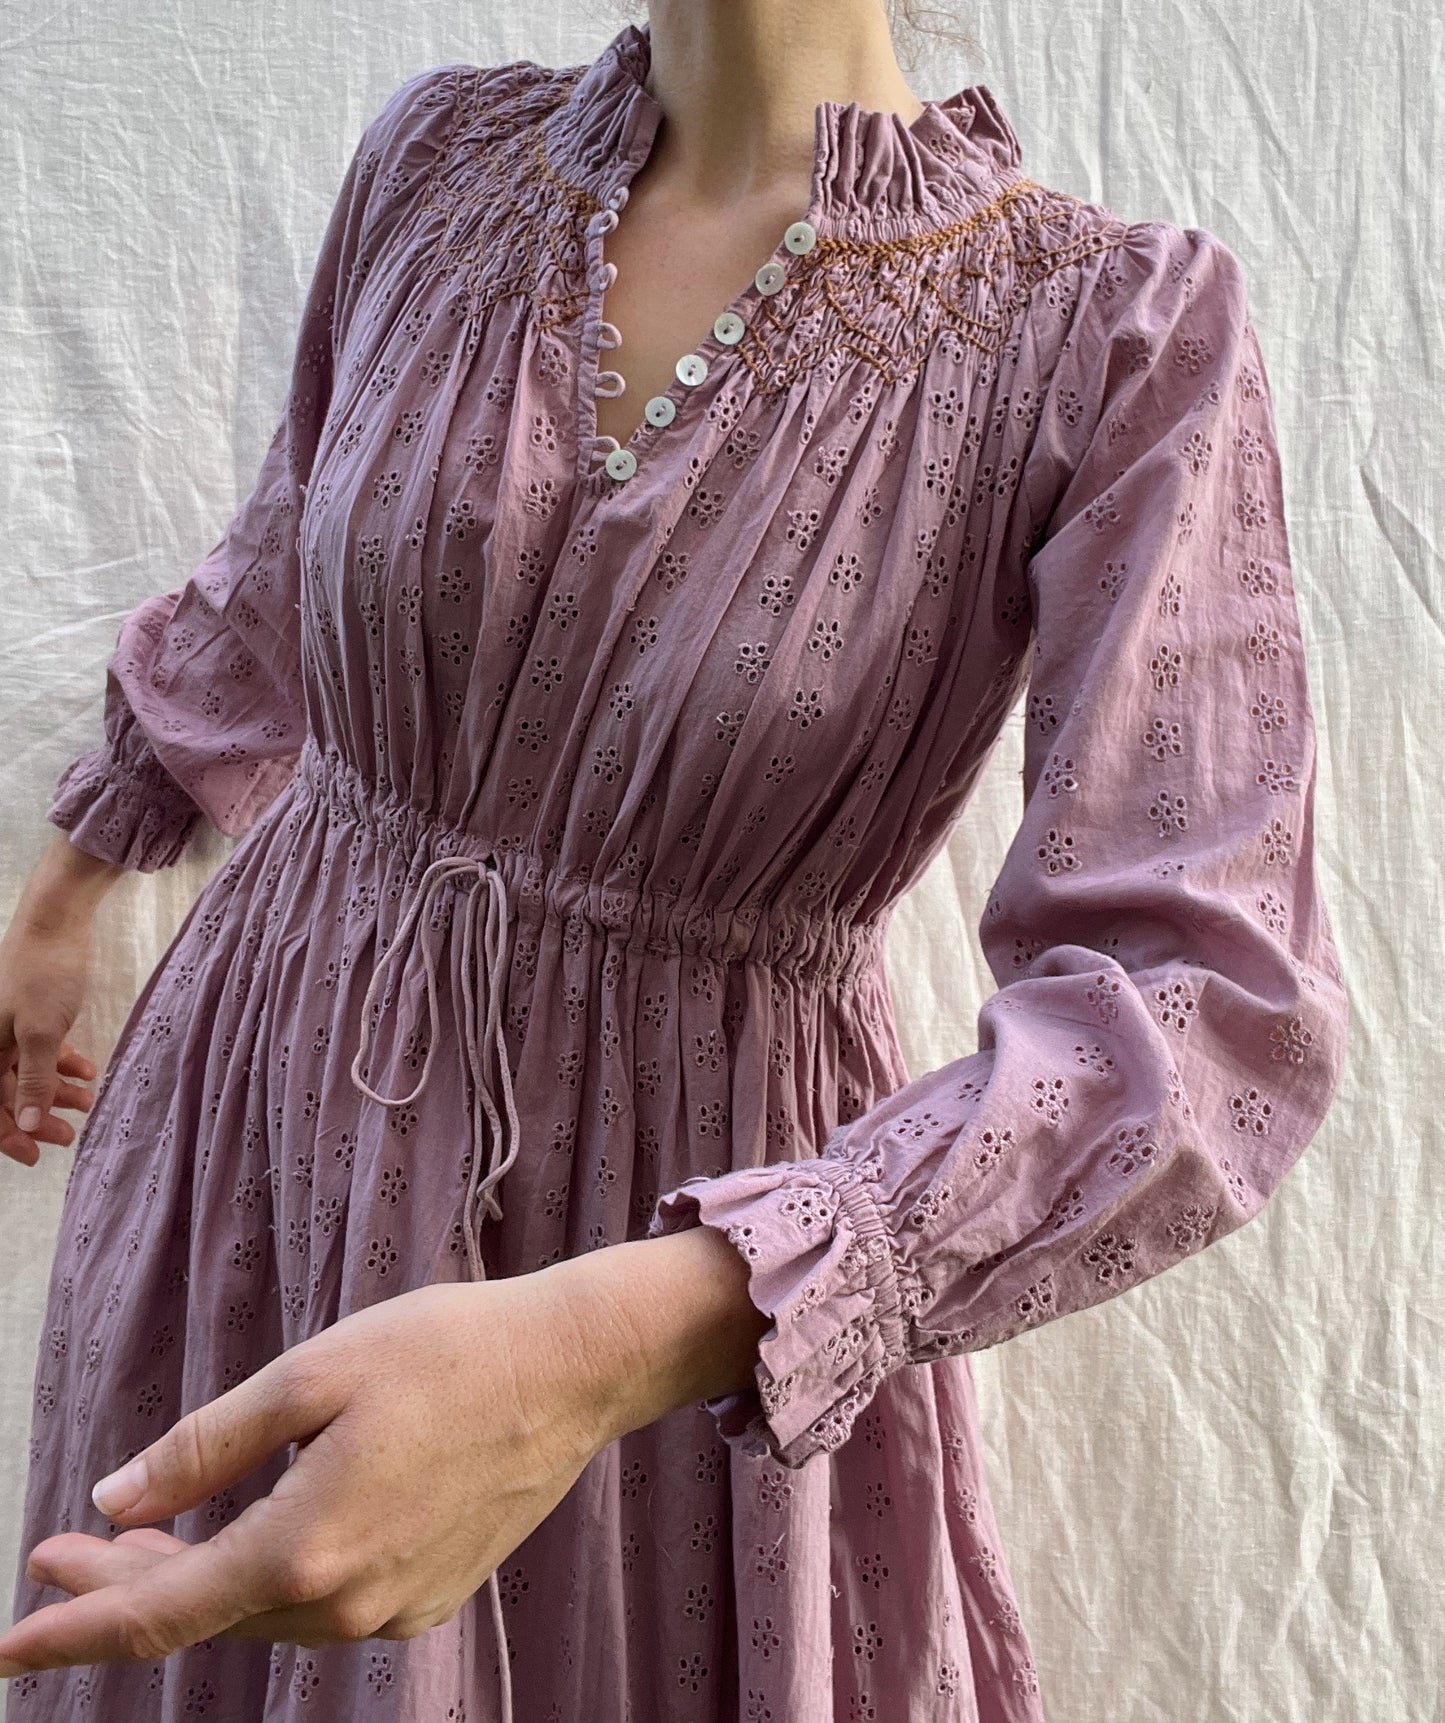 100% RECYCLED COTTON - PRAIRIE MAXI DRESS DUSTY LAVENDER LACE HAND SMOCKED